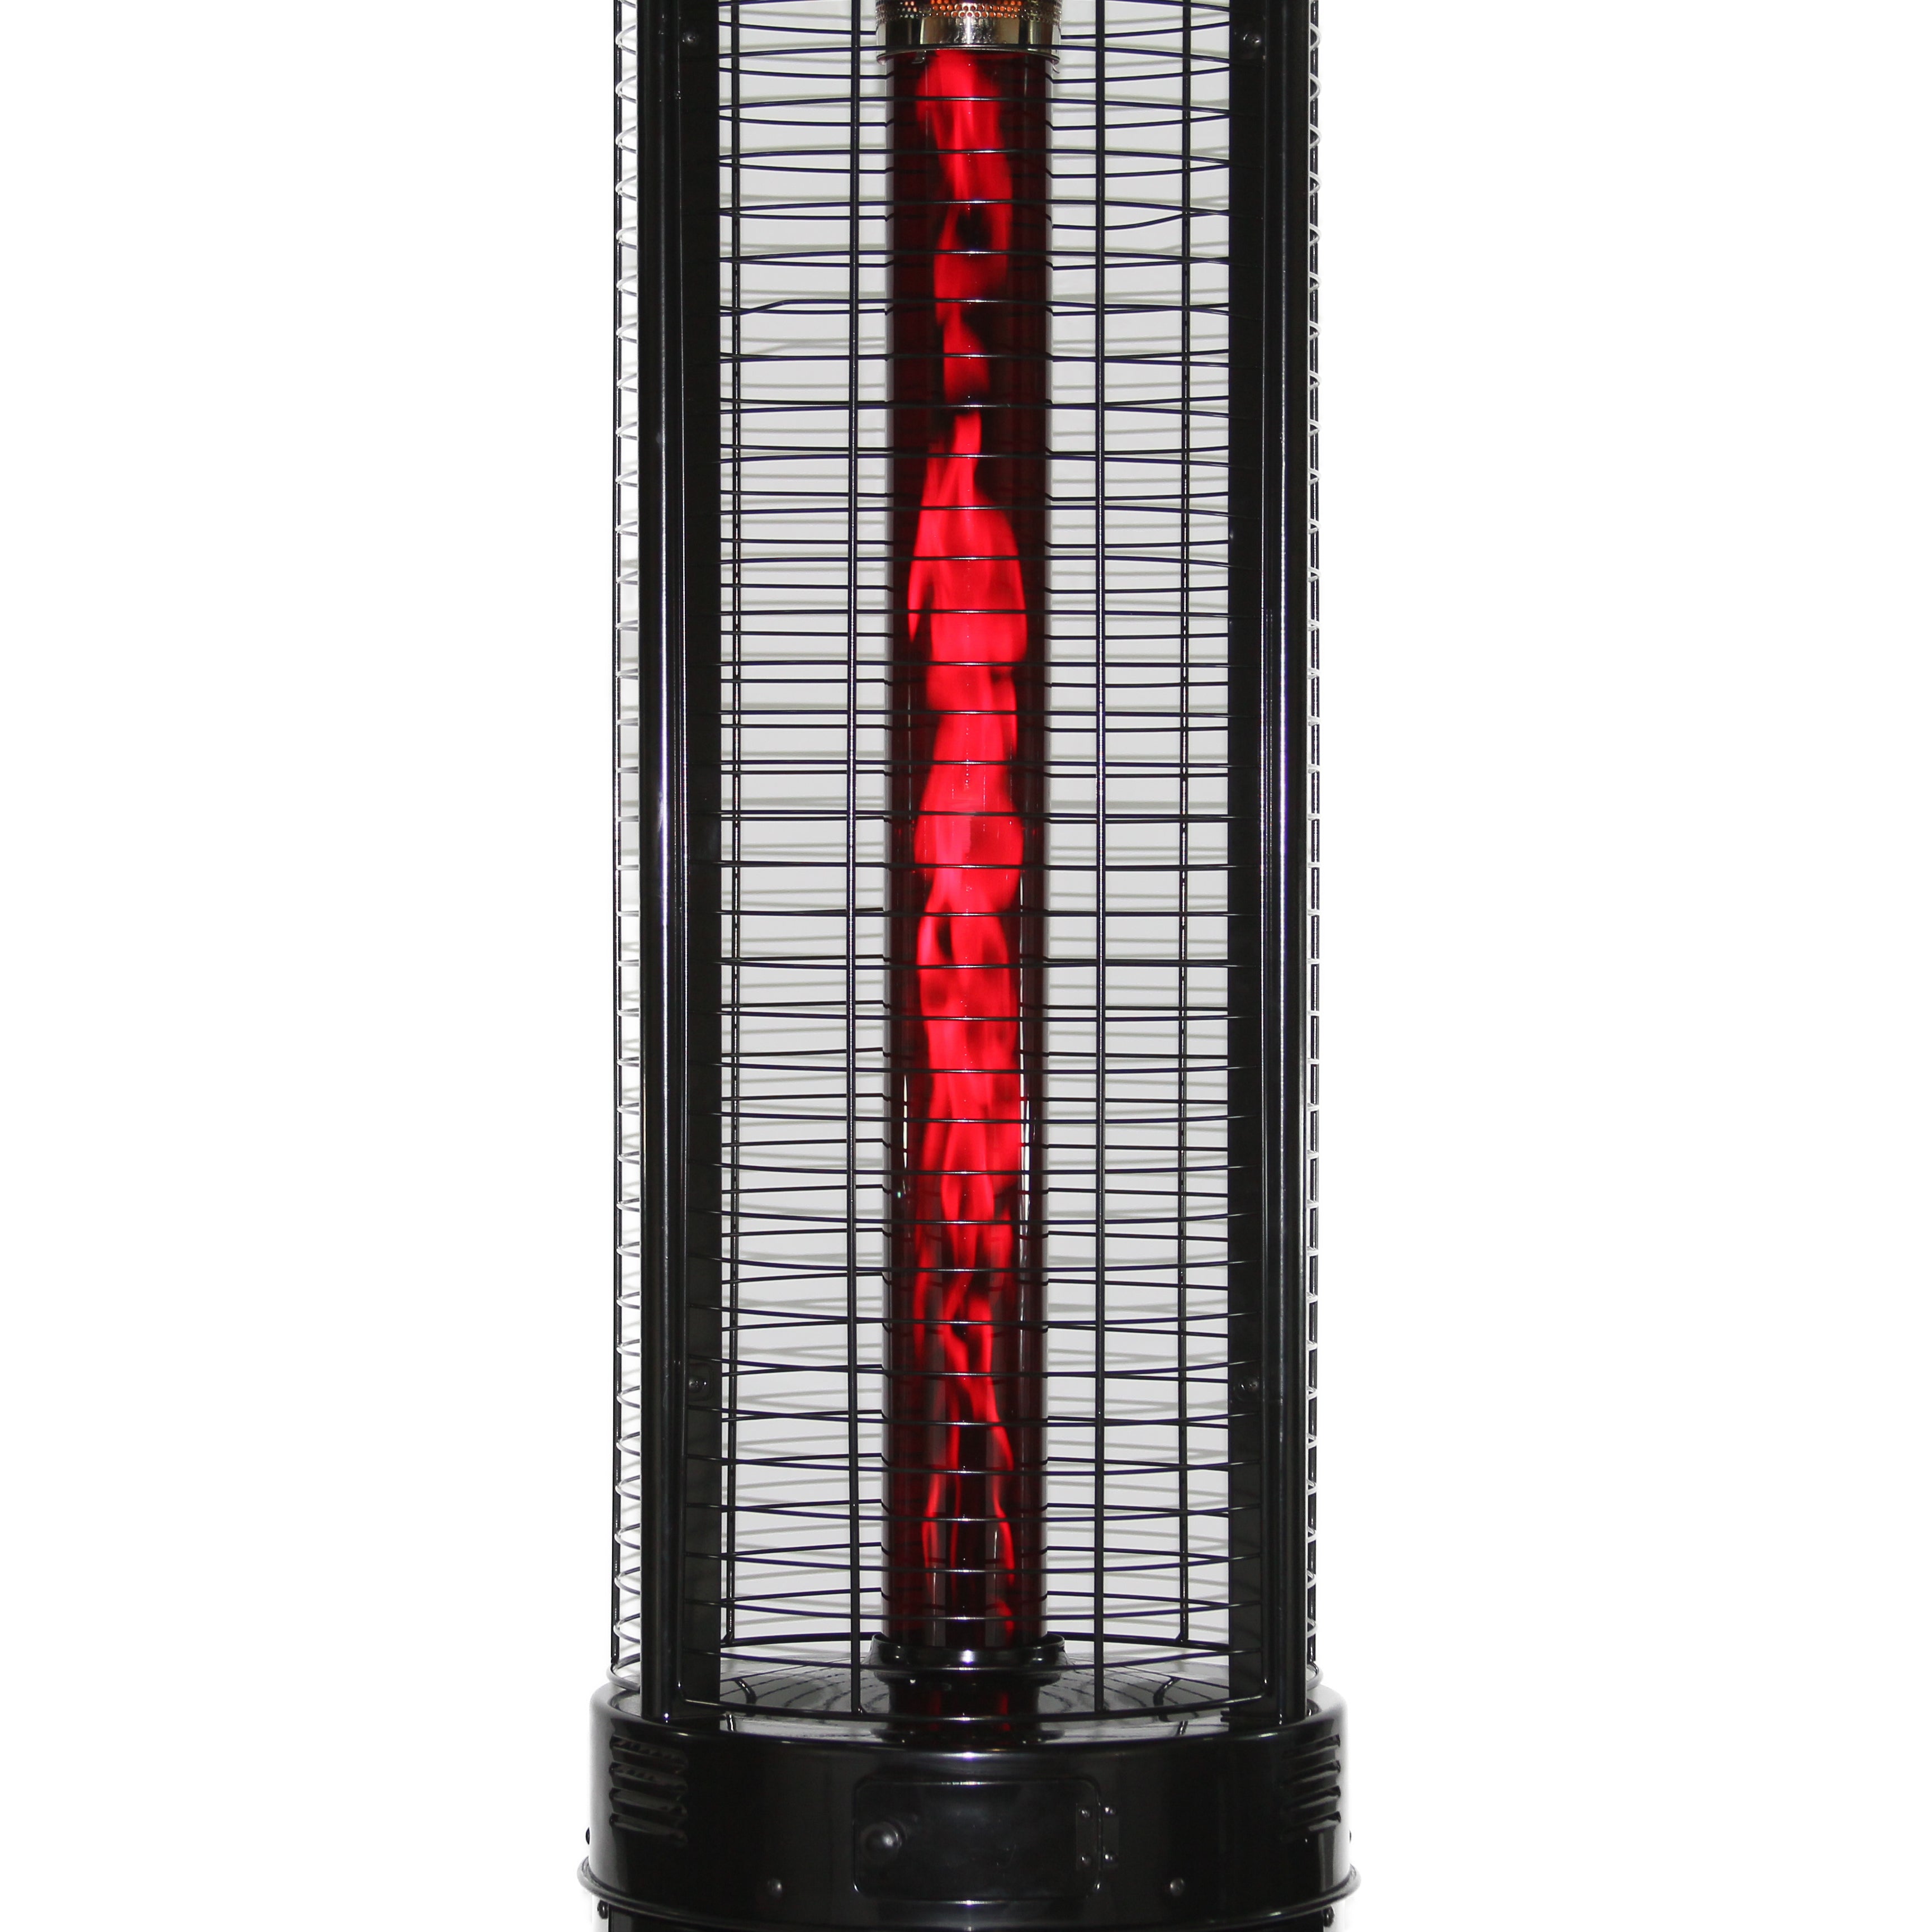 RADtec 80 Ellipse Flame Propane Patio Heater - Black with Ruby Glass 41,000 BTU  - 80-ELL-FLM-HT - Enlarge View